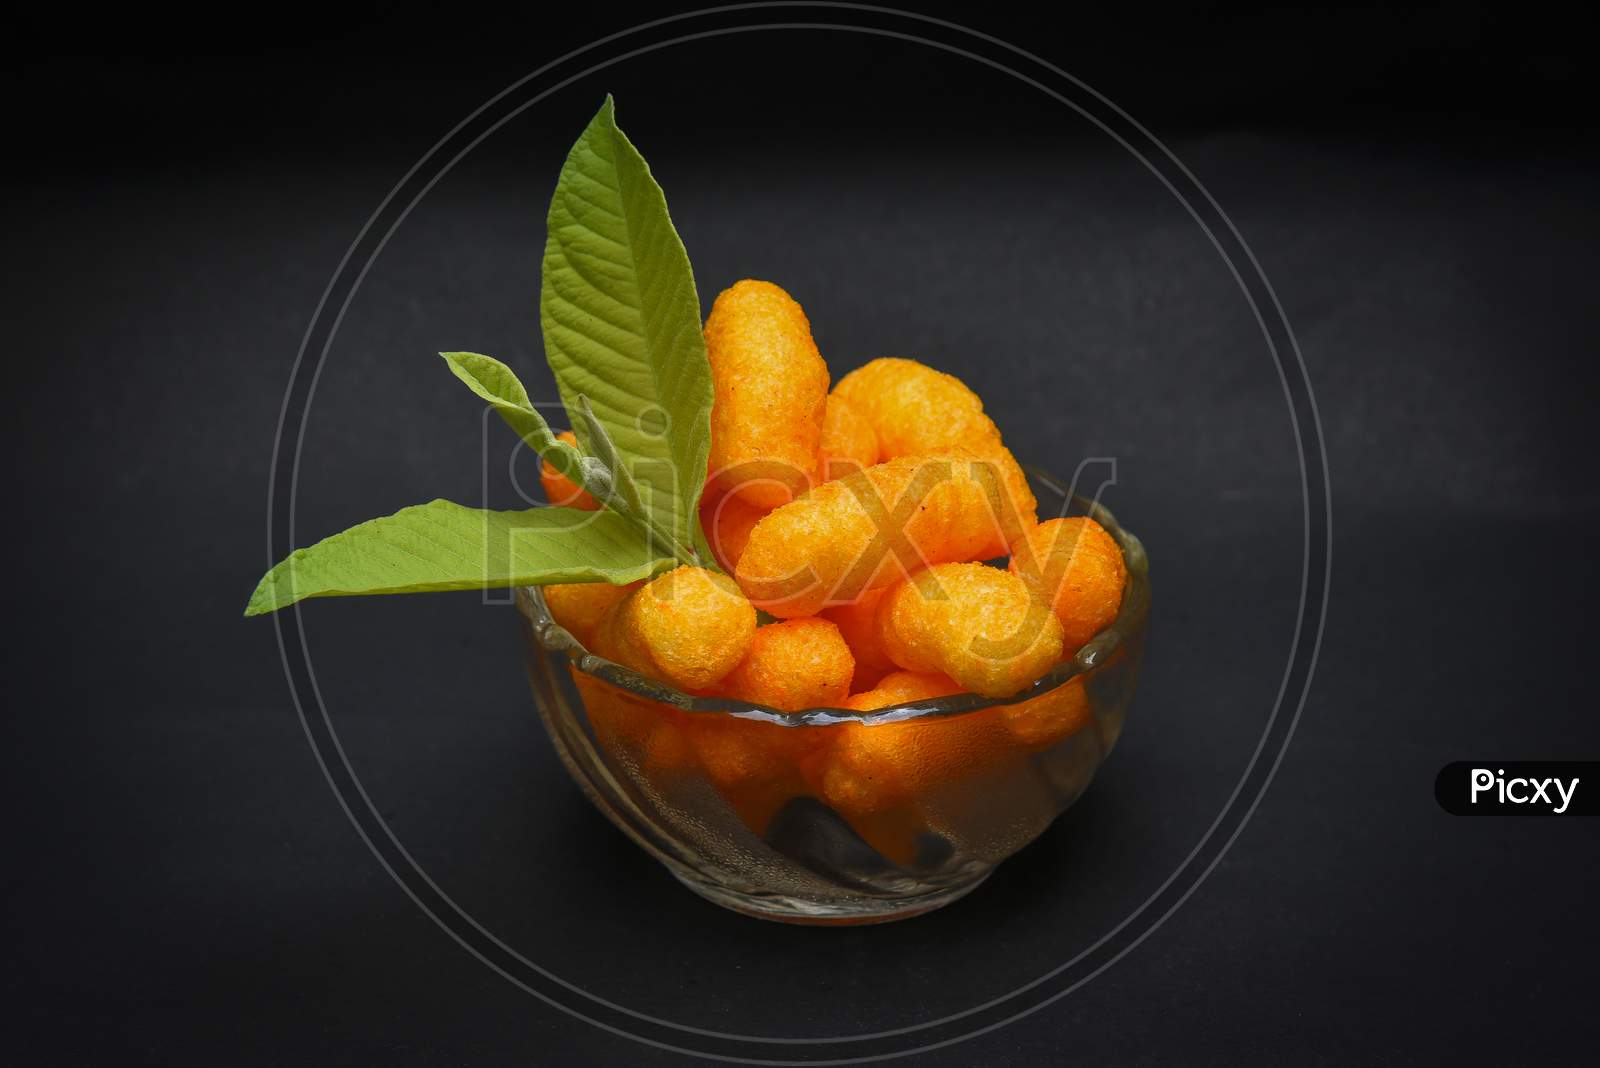 Snacks, crochets or cheese puff pastry on dark background.Different kinds of popcorn in bowl